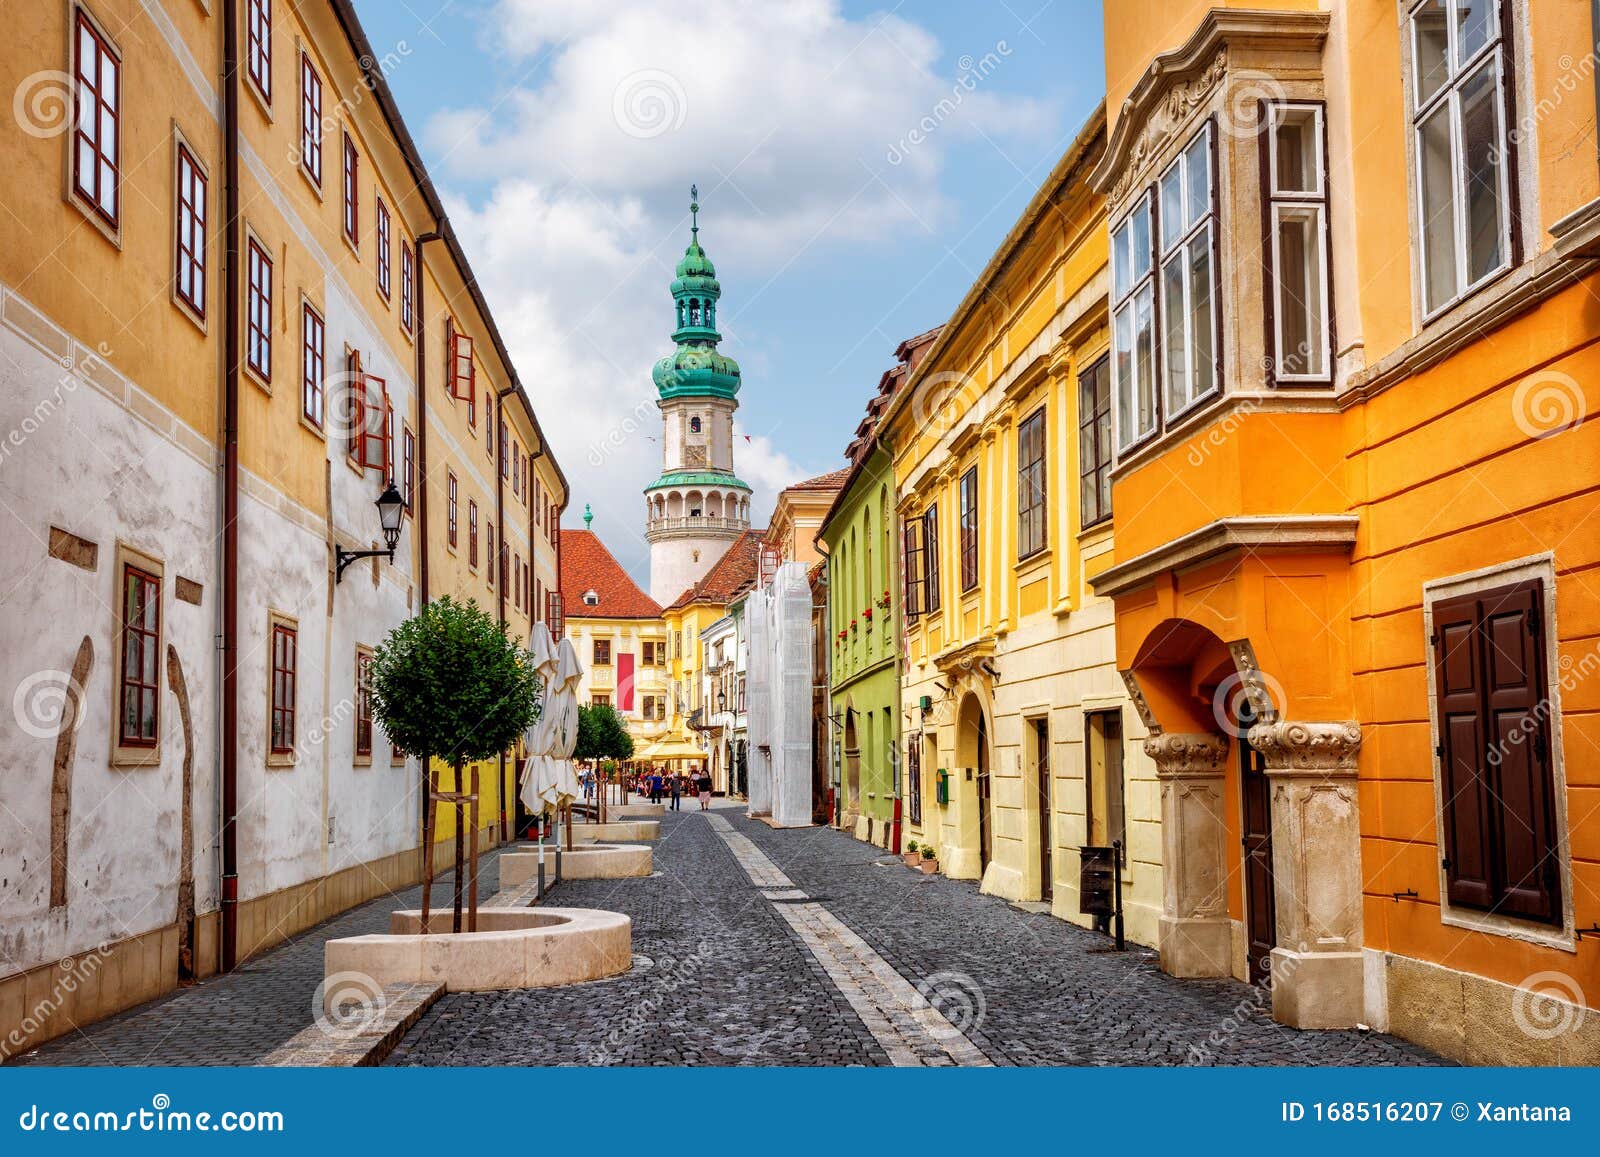 sopron historical old town, hungary